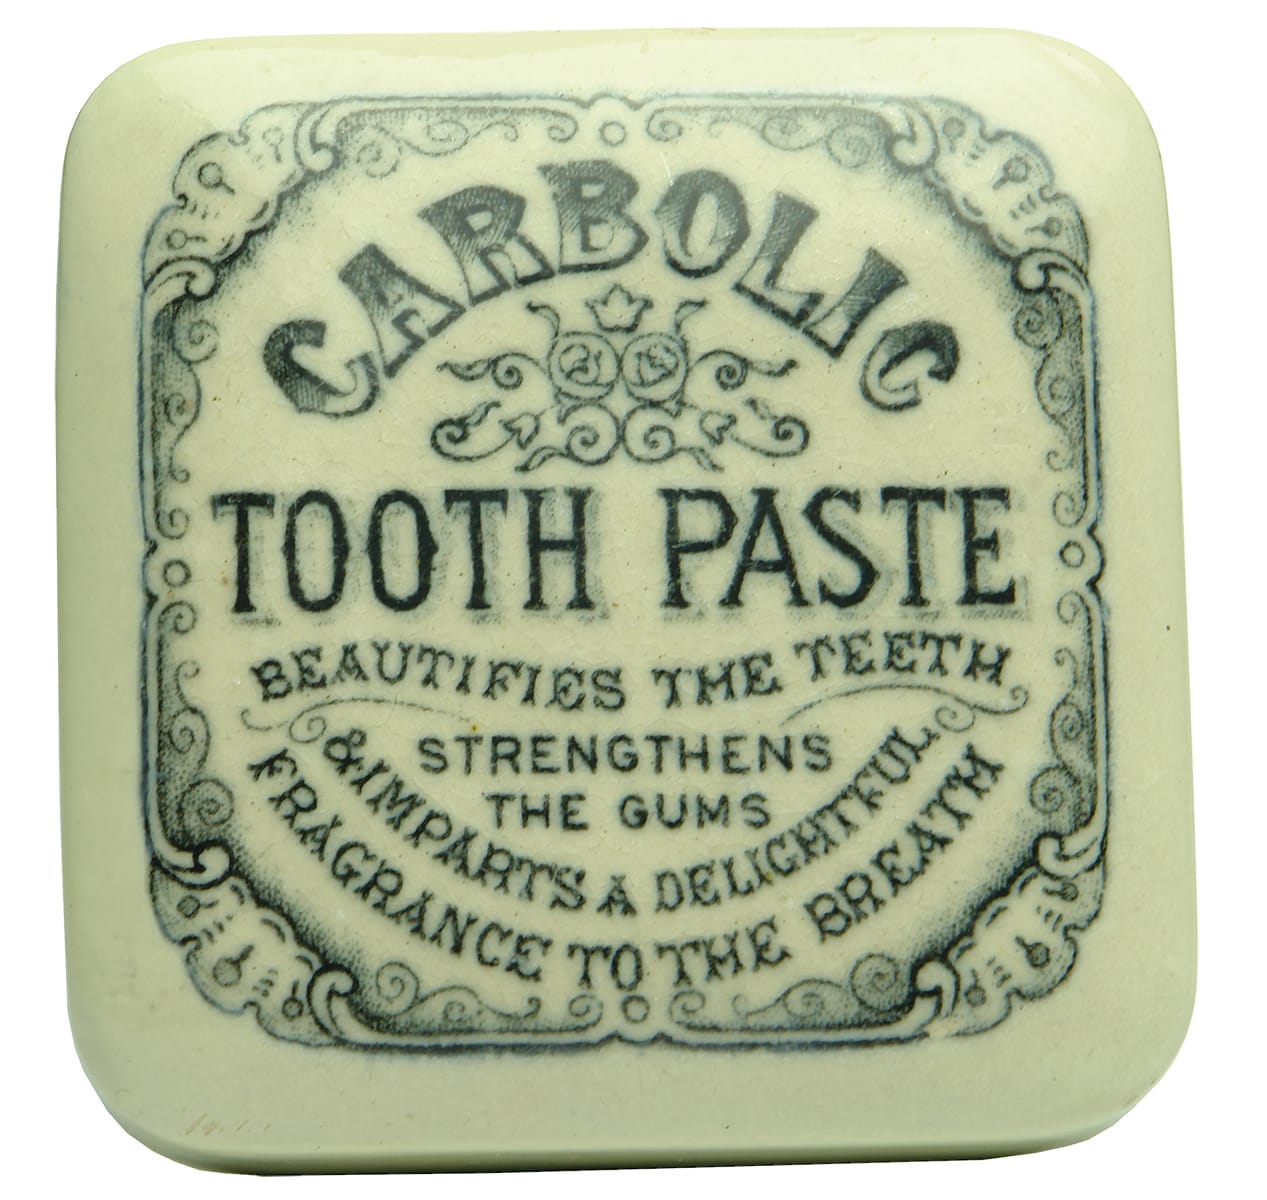 Carbolic Tooth Paste Square Pot Lid